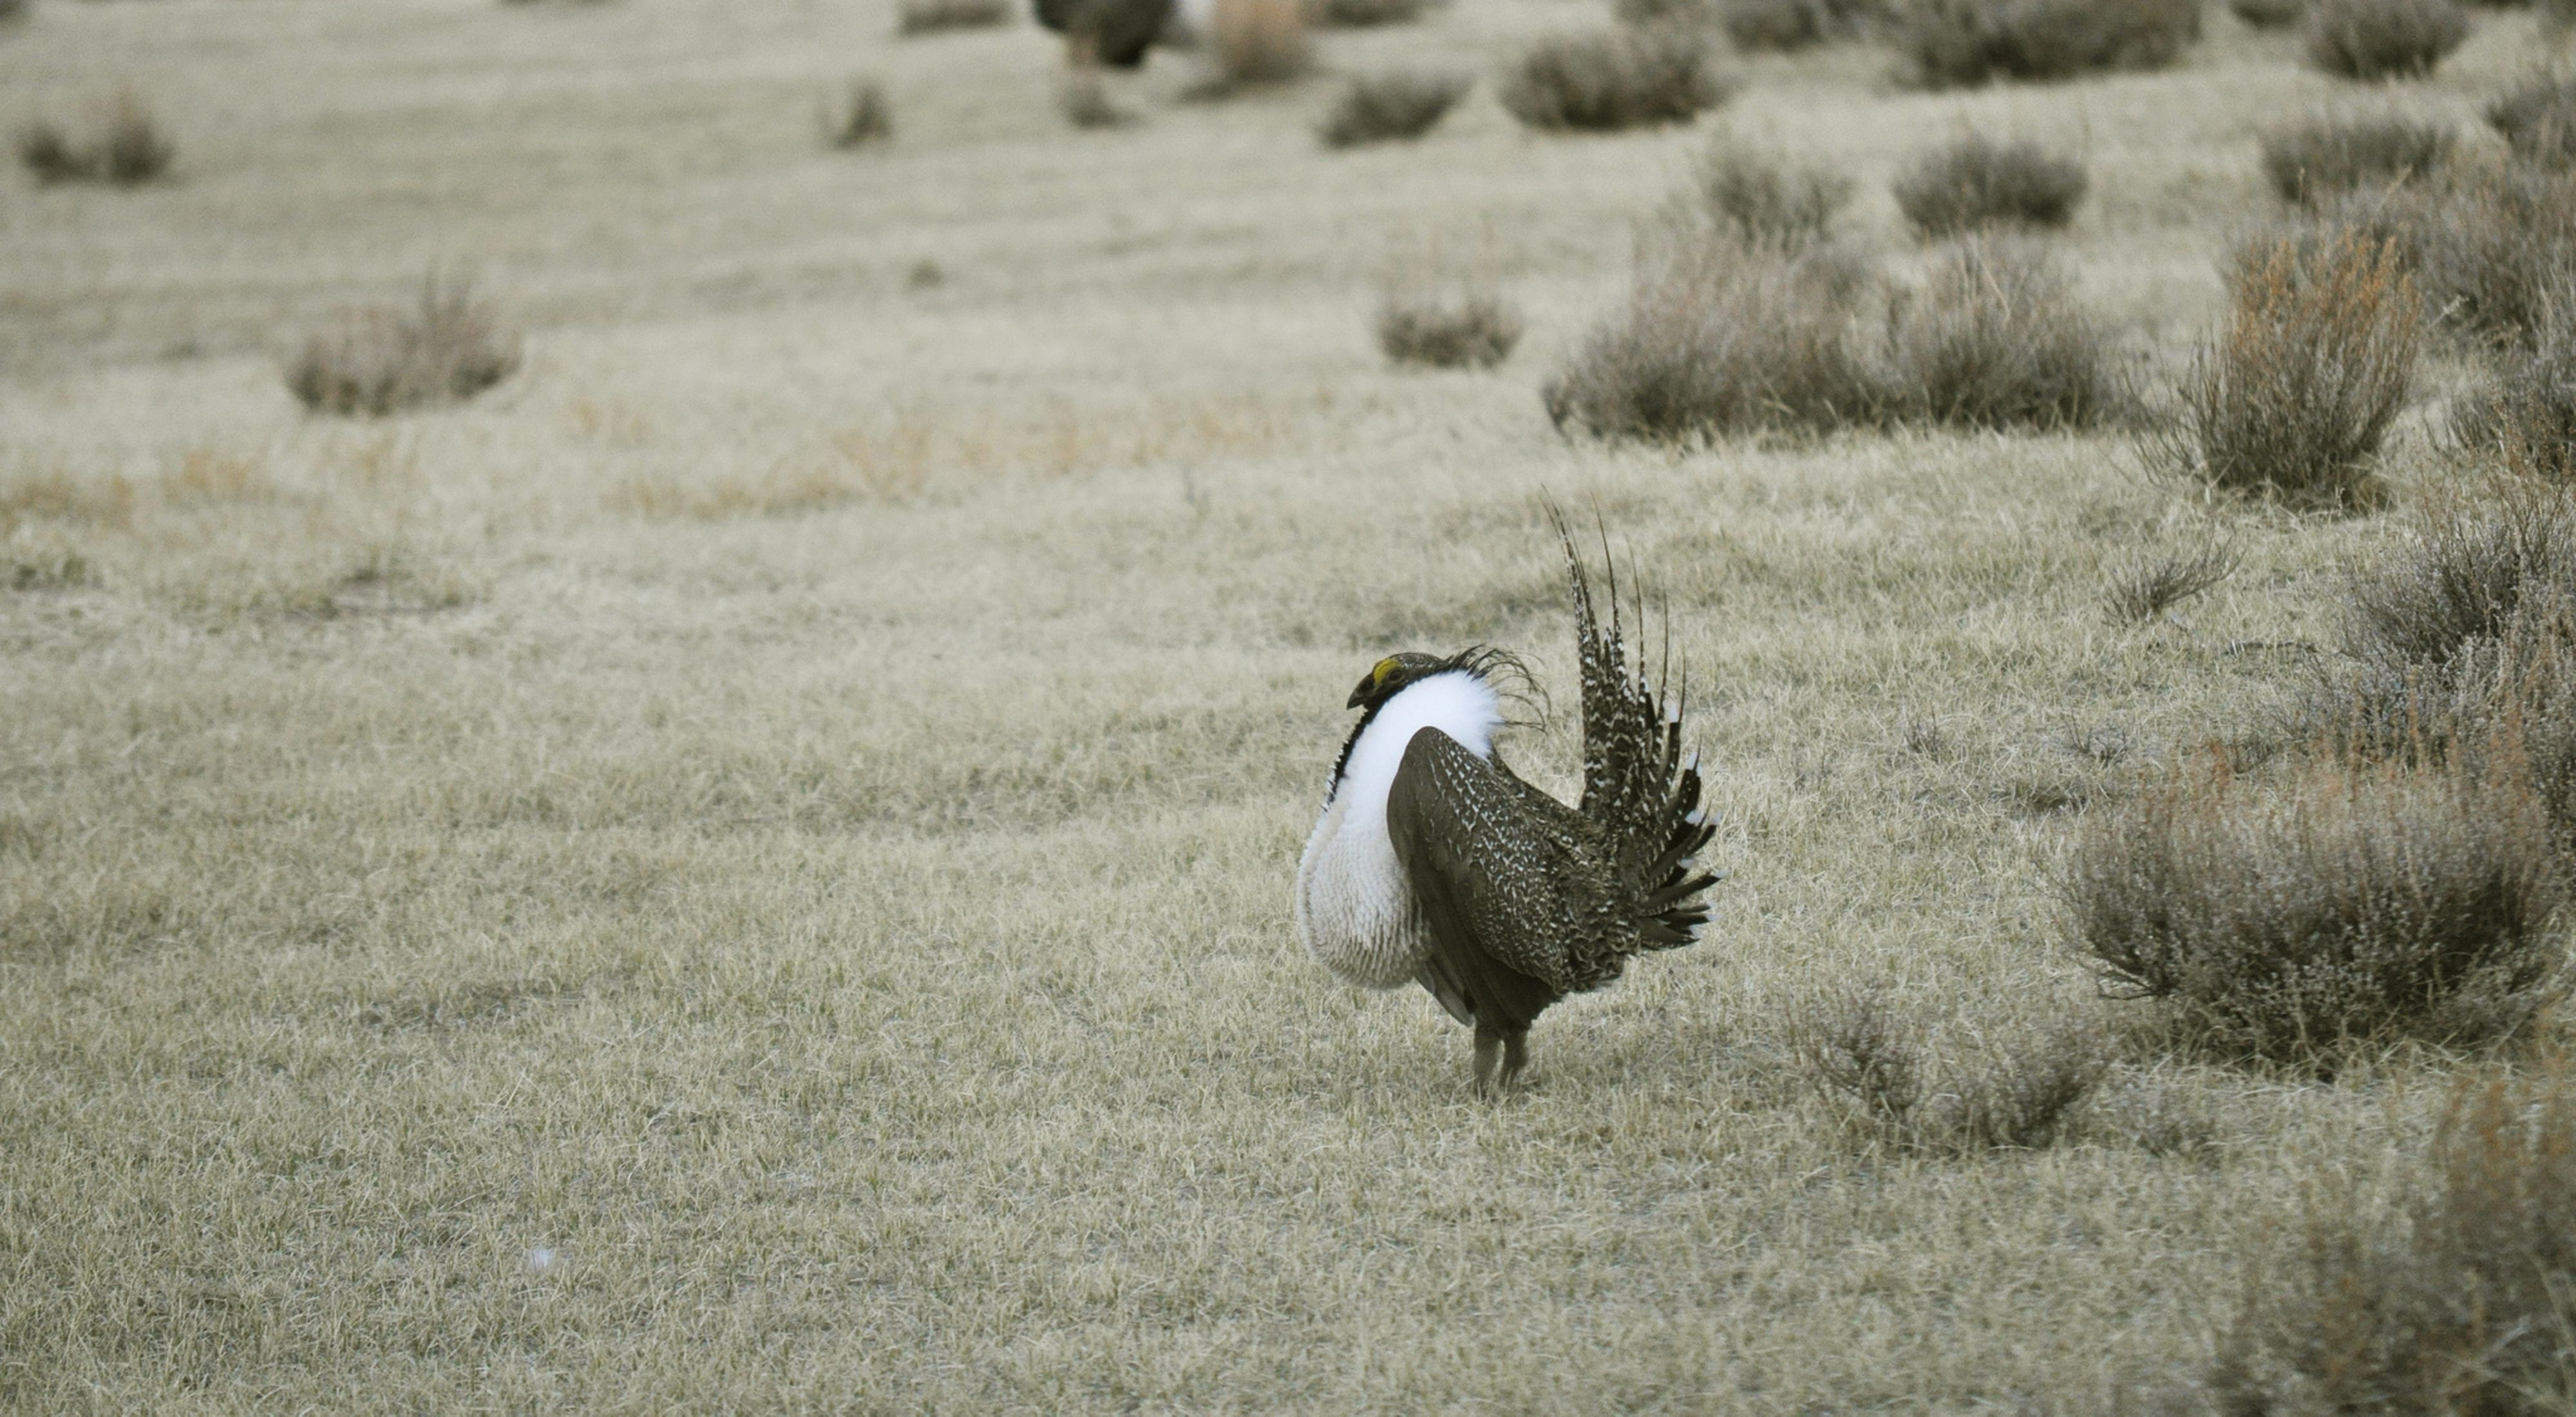 Male greater sage-grouse standing among the sagebrush.